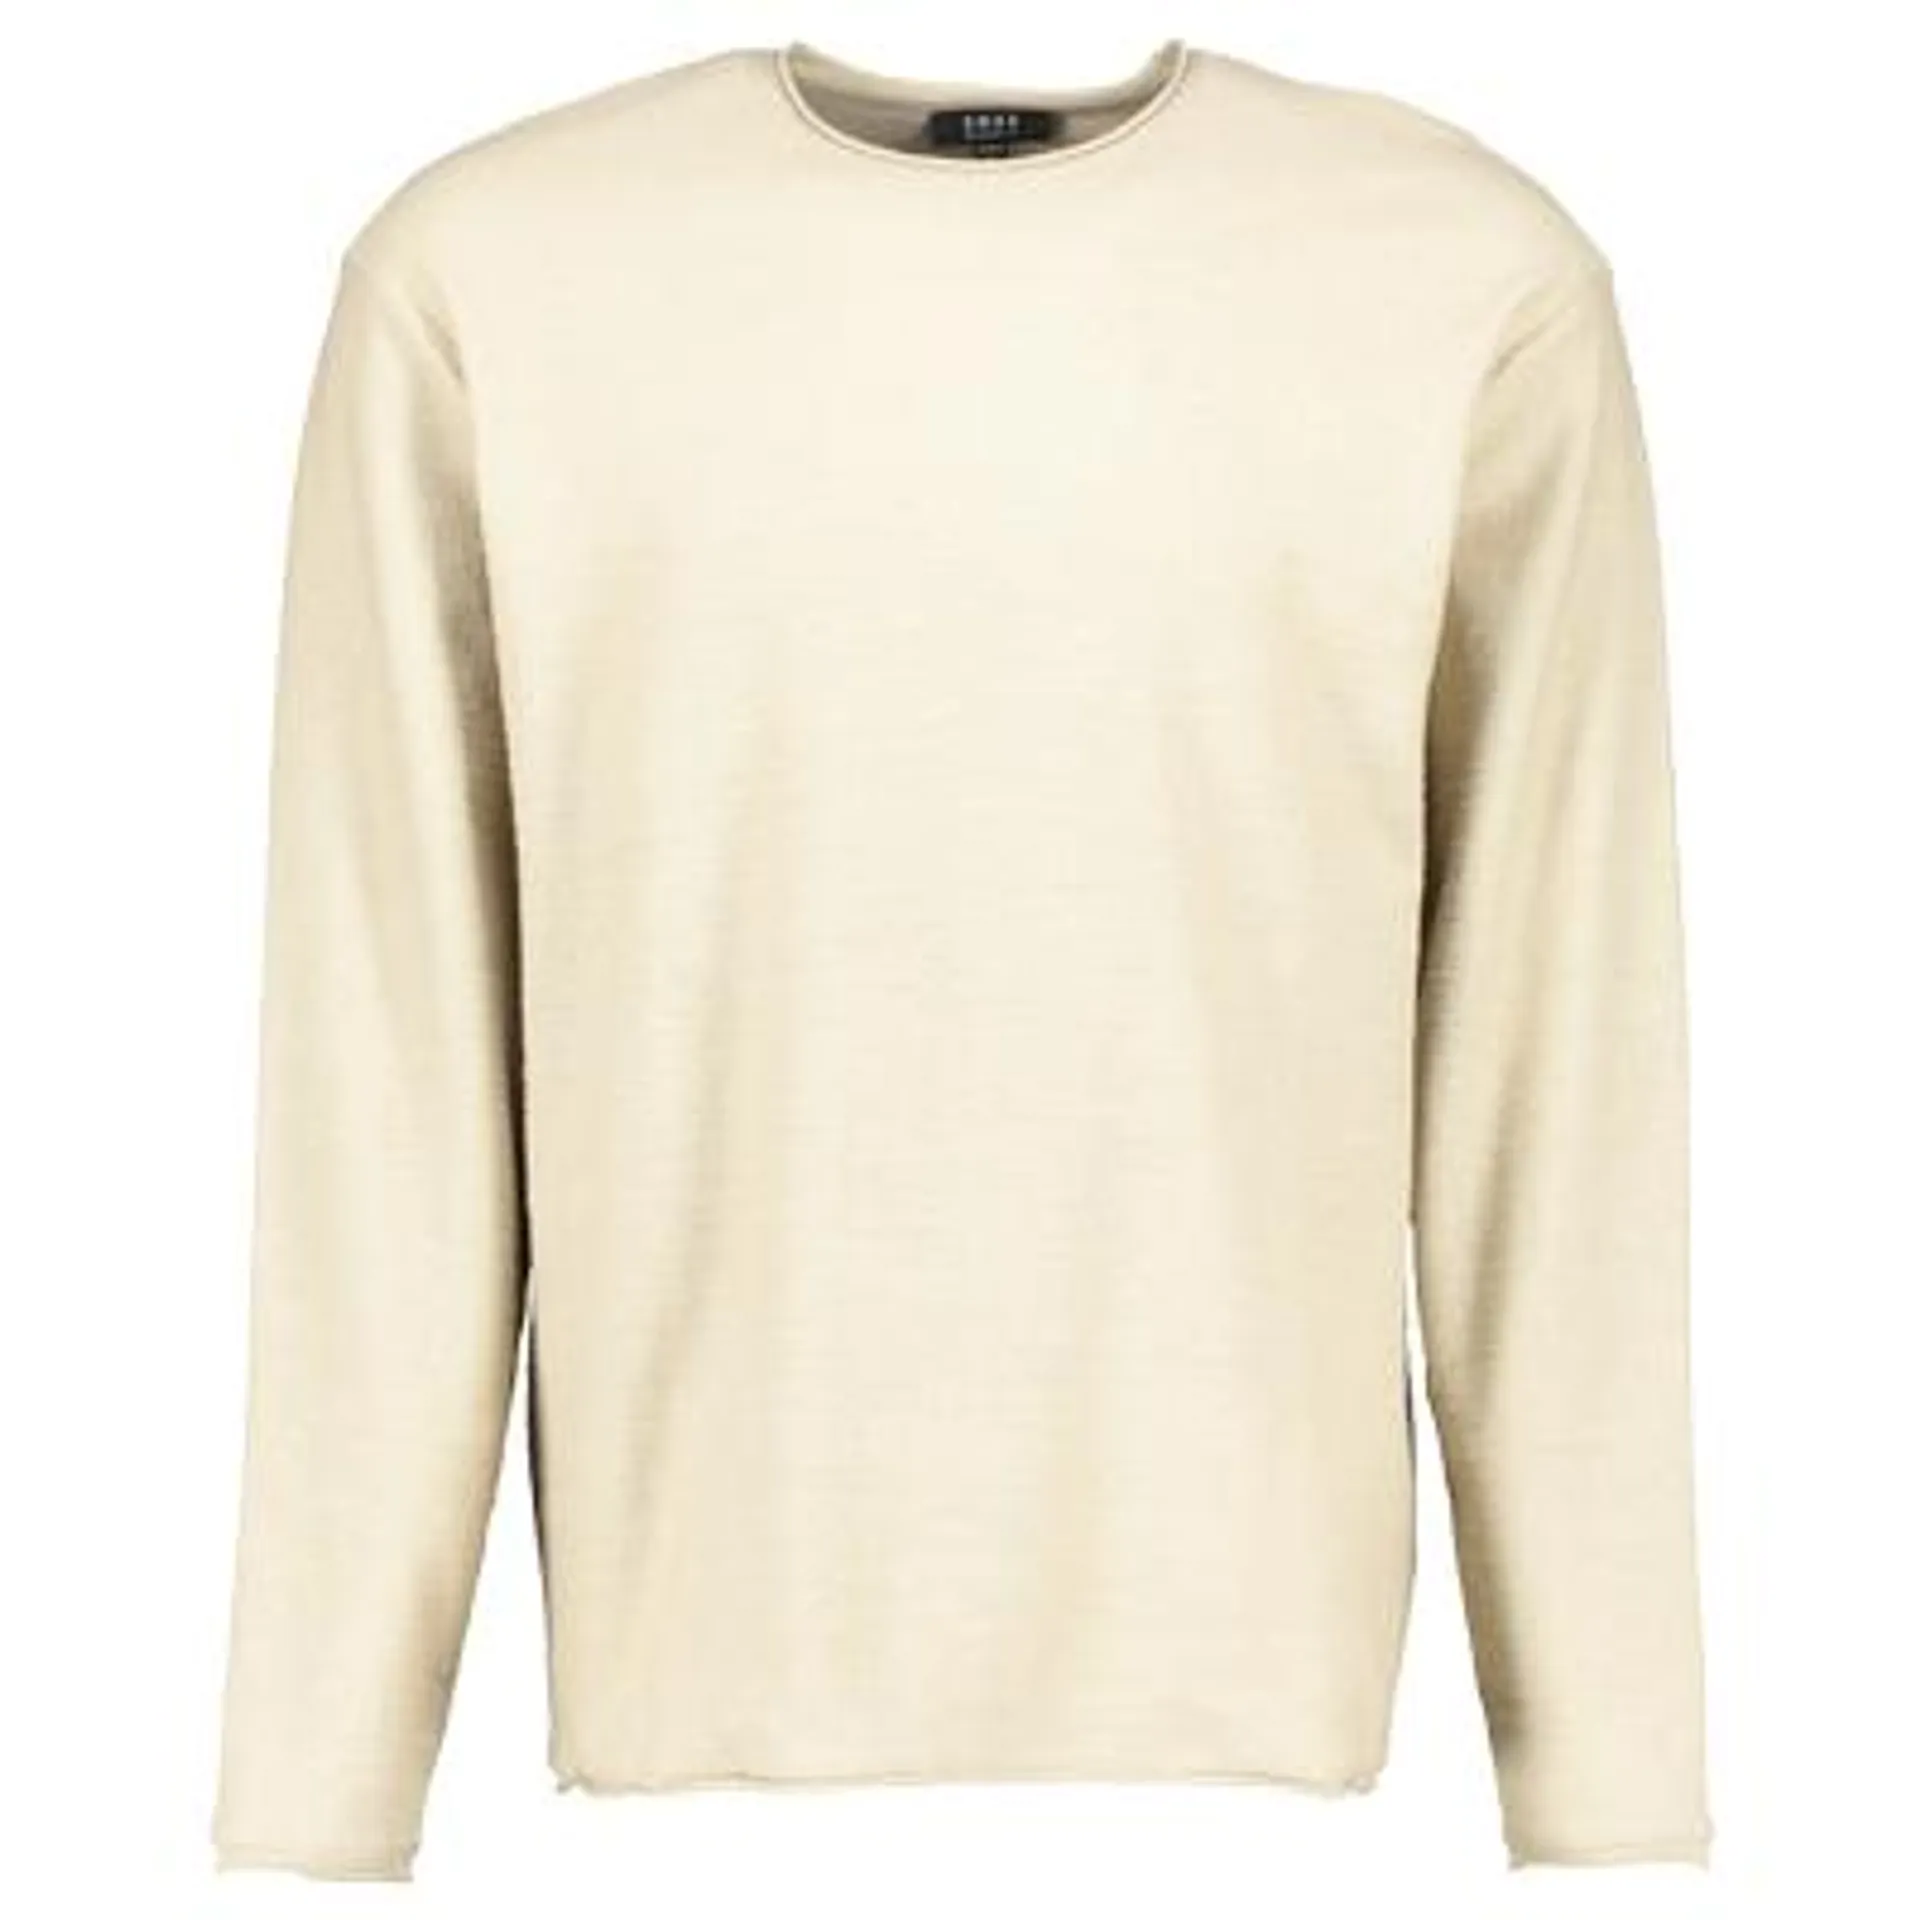 Long-sleeved shirt with round neck